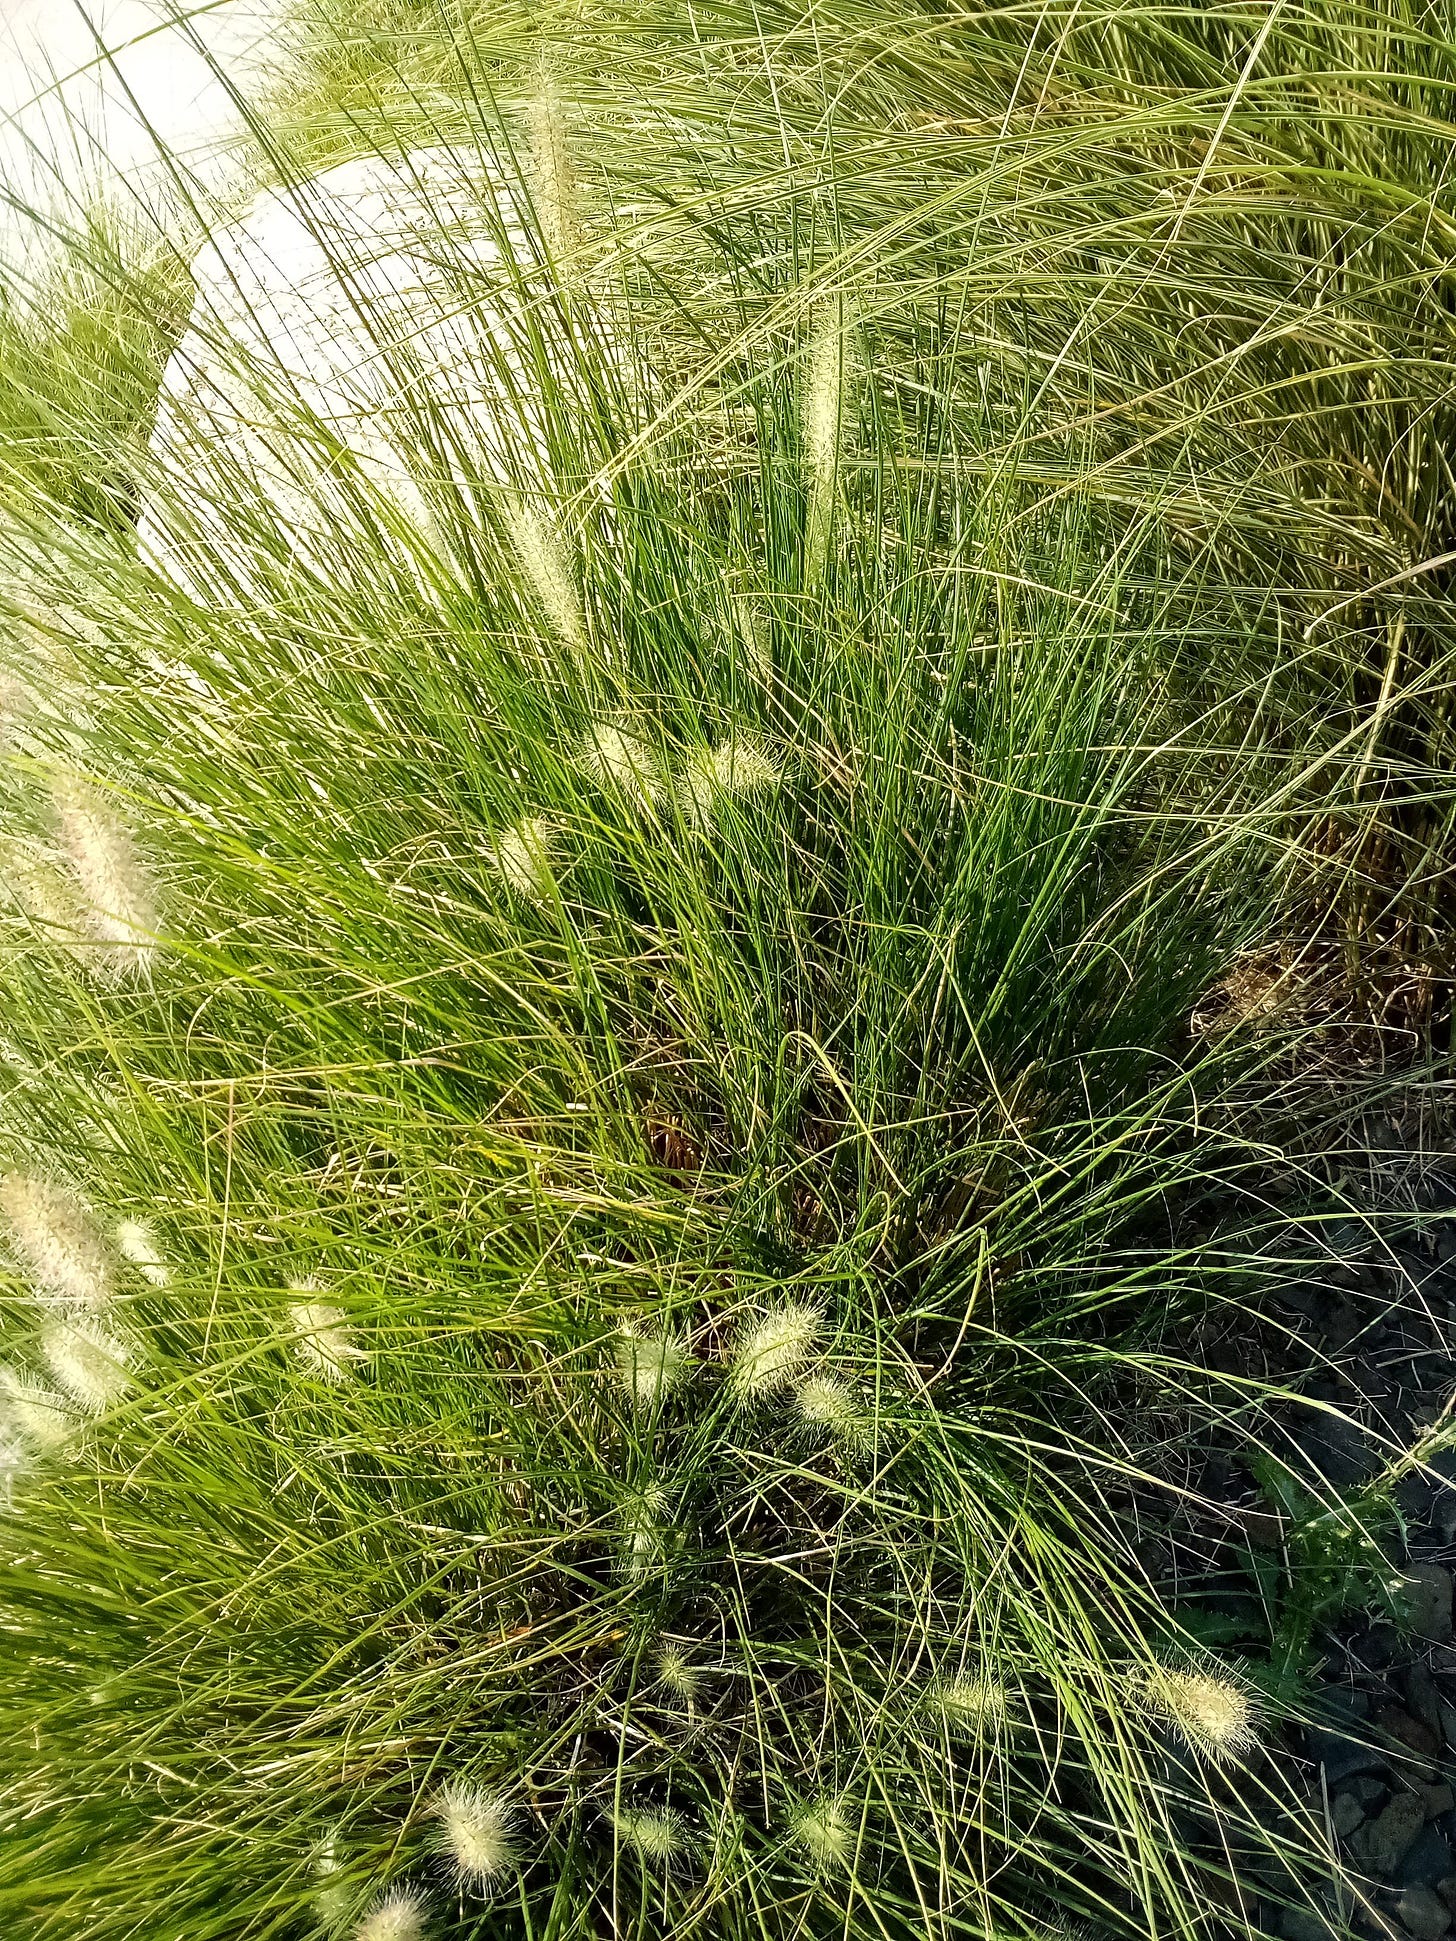 Grasses in front of a white boulder